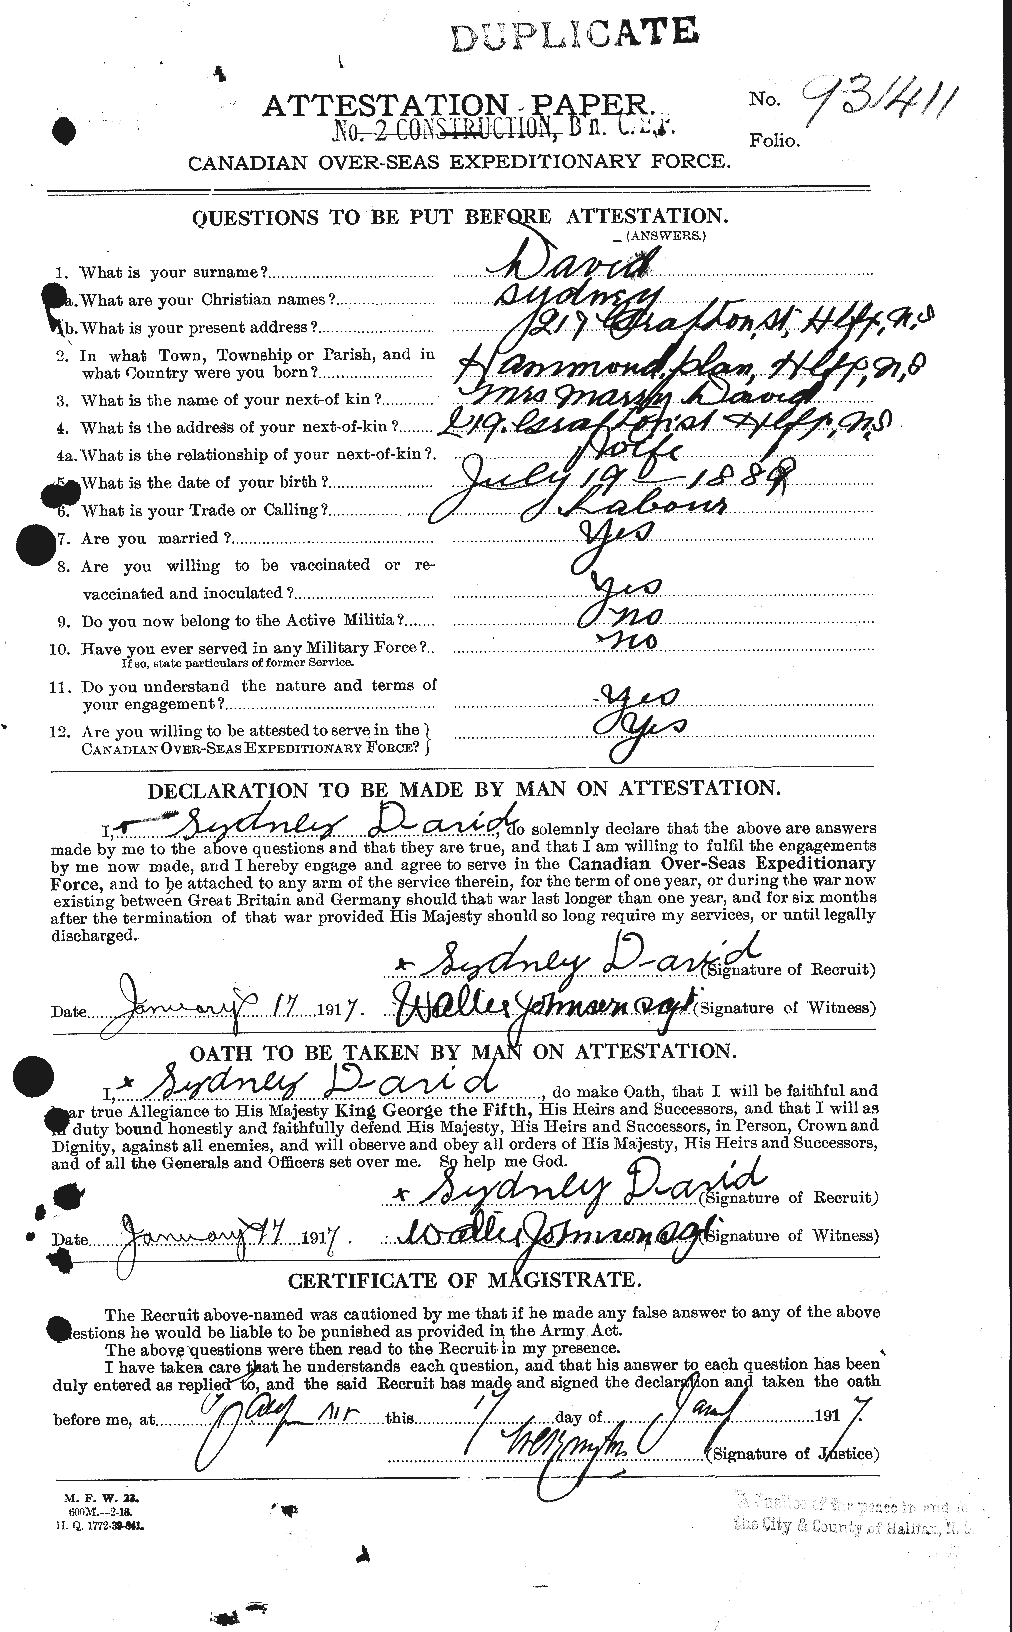 Personnel Records of the First World War - CEF 280647a